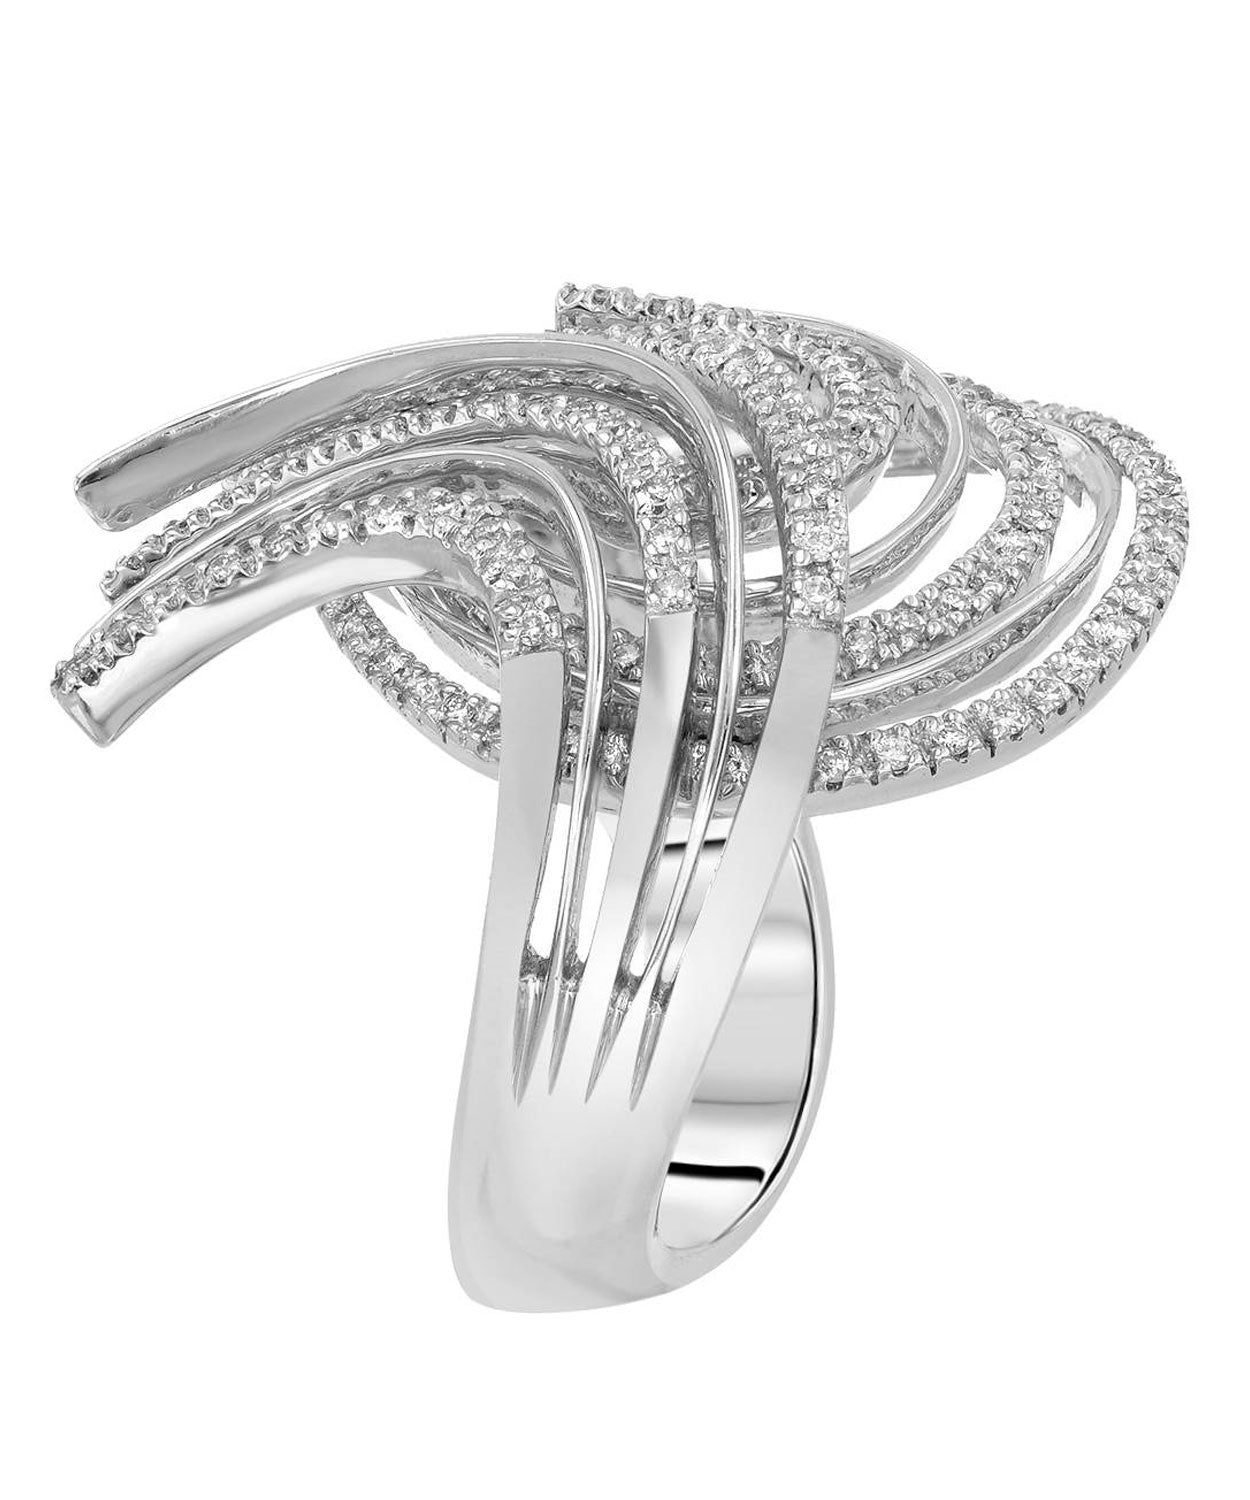 Glamour Collection 0.55 ctw Diamond 18k White Gold Statement Cocktail Ring View 2